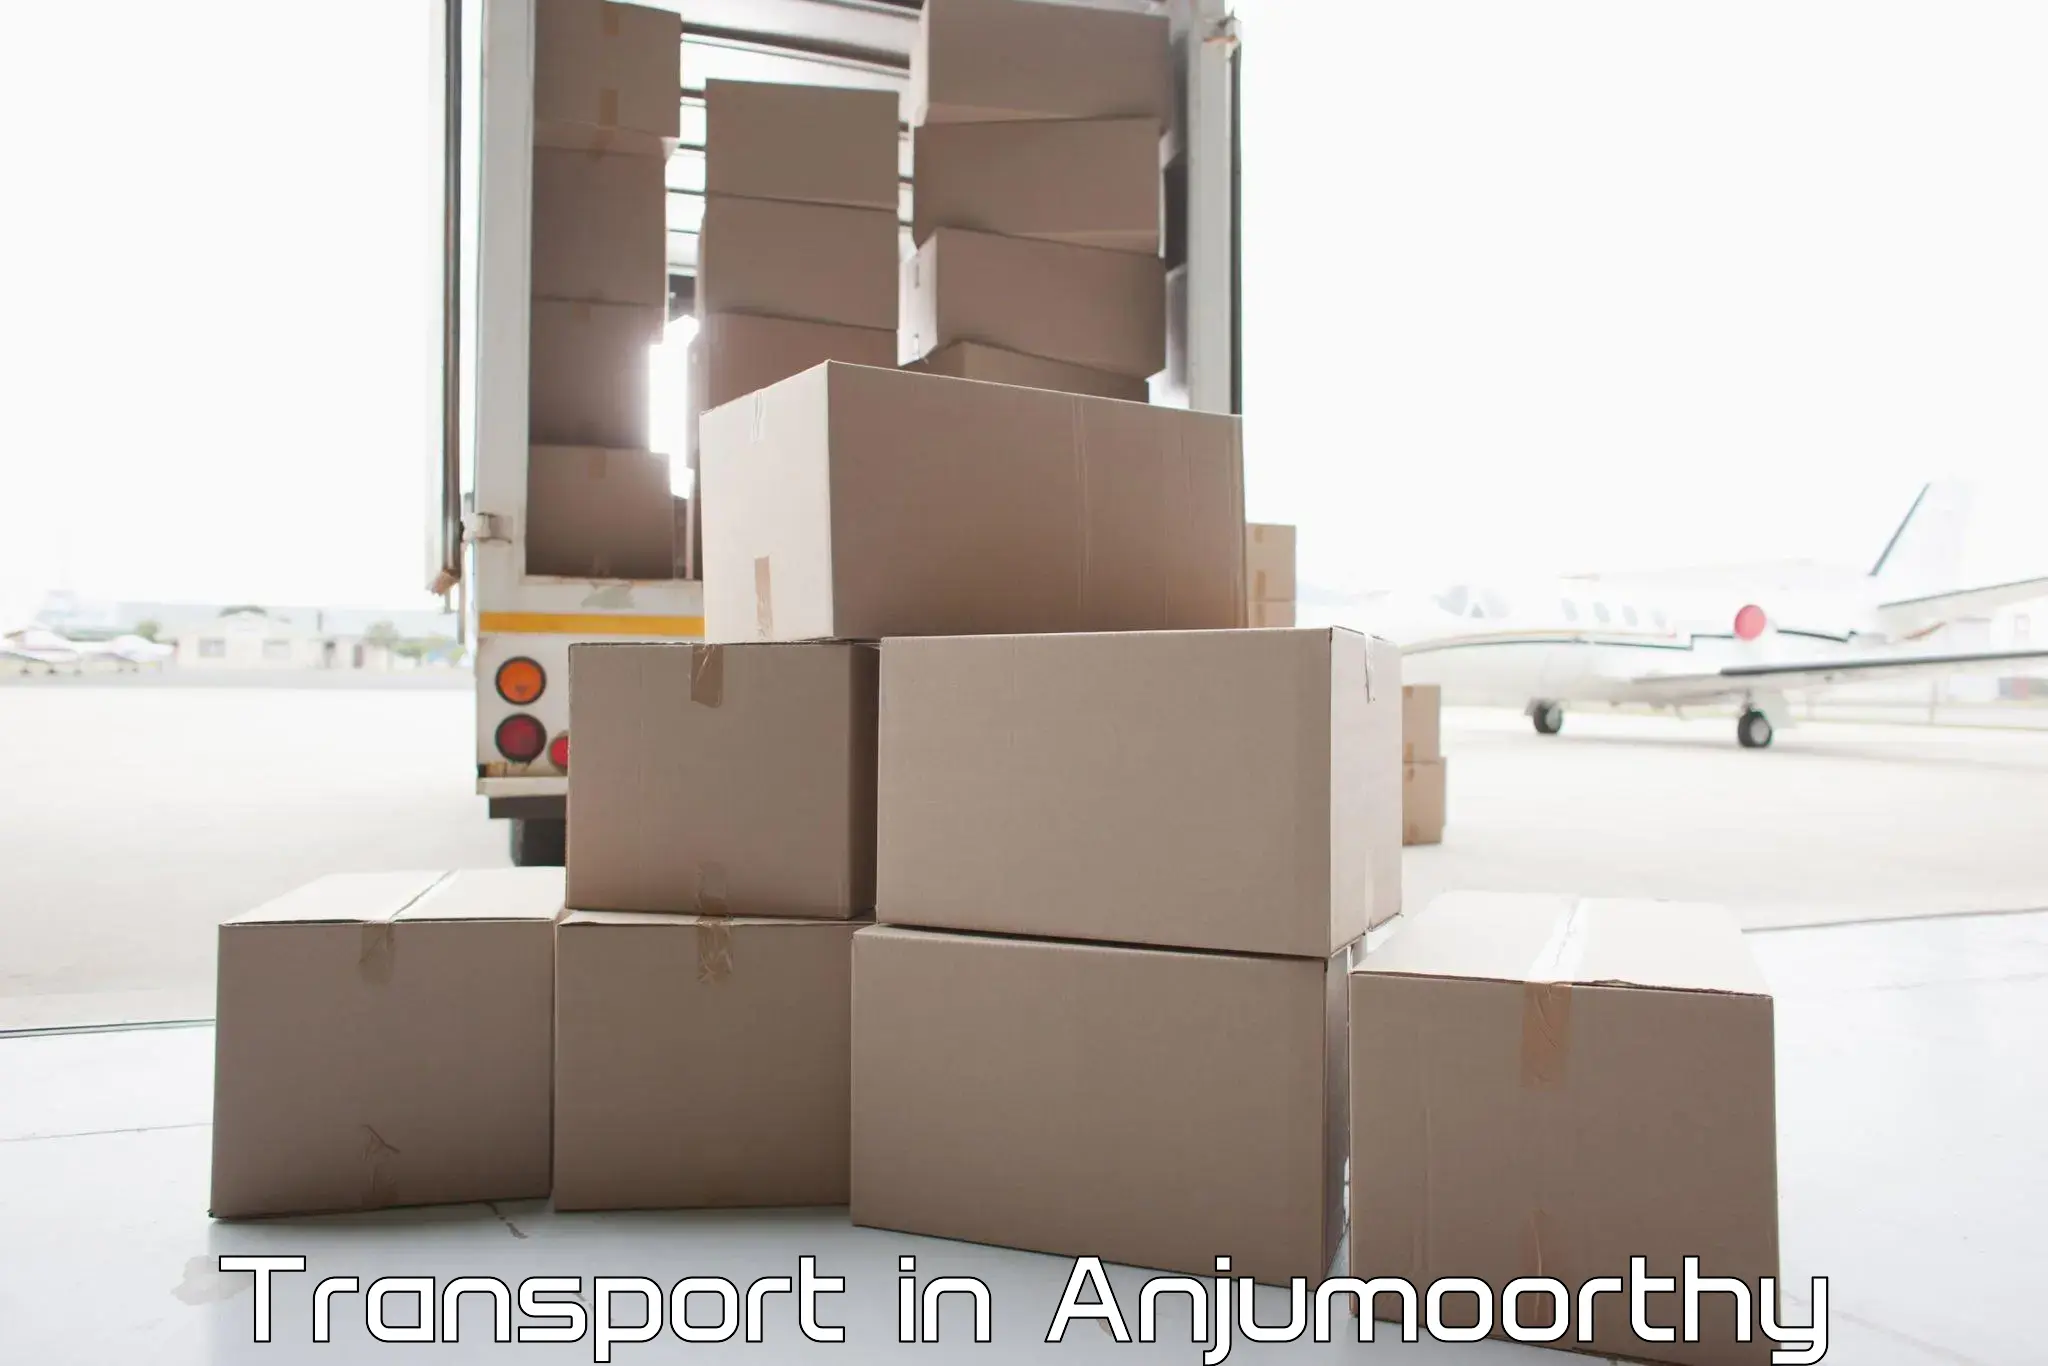 Interstate transport services in Anjumoorthy